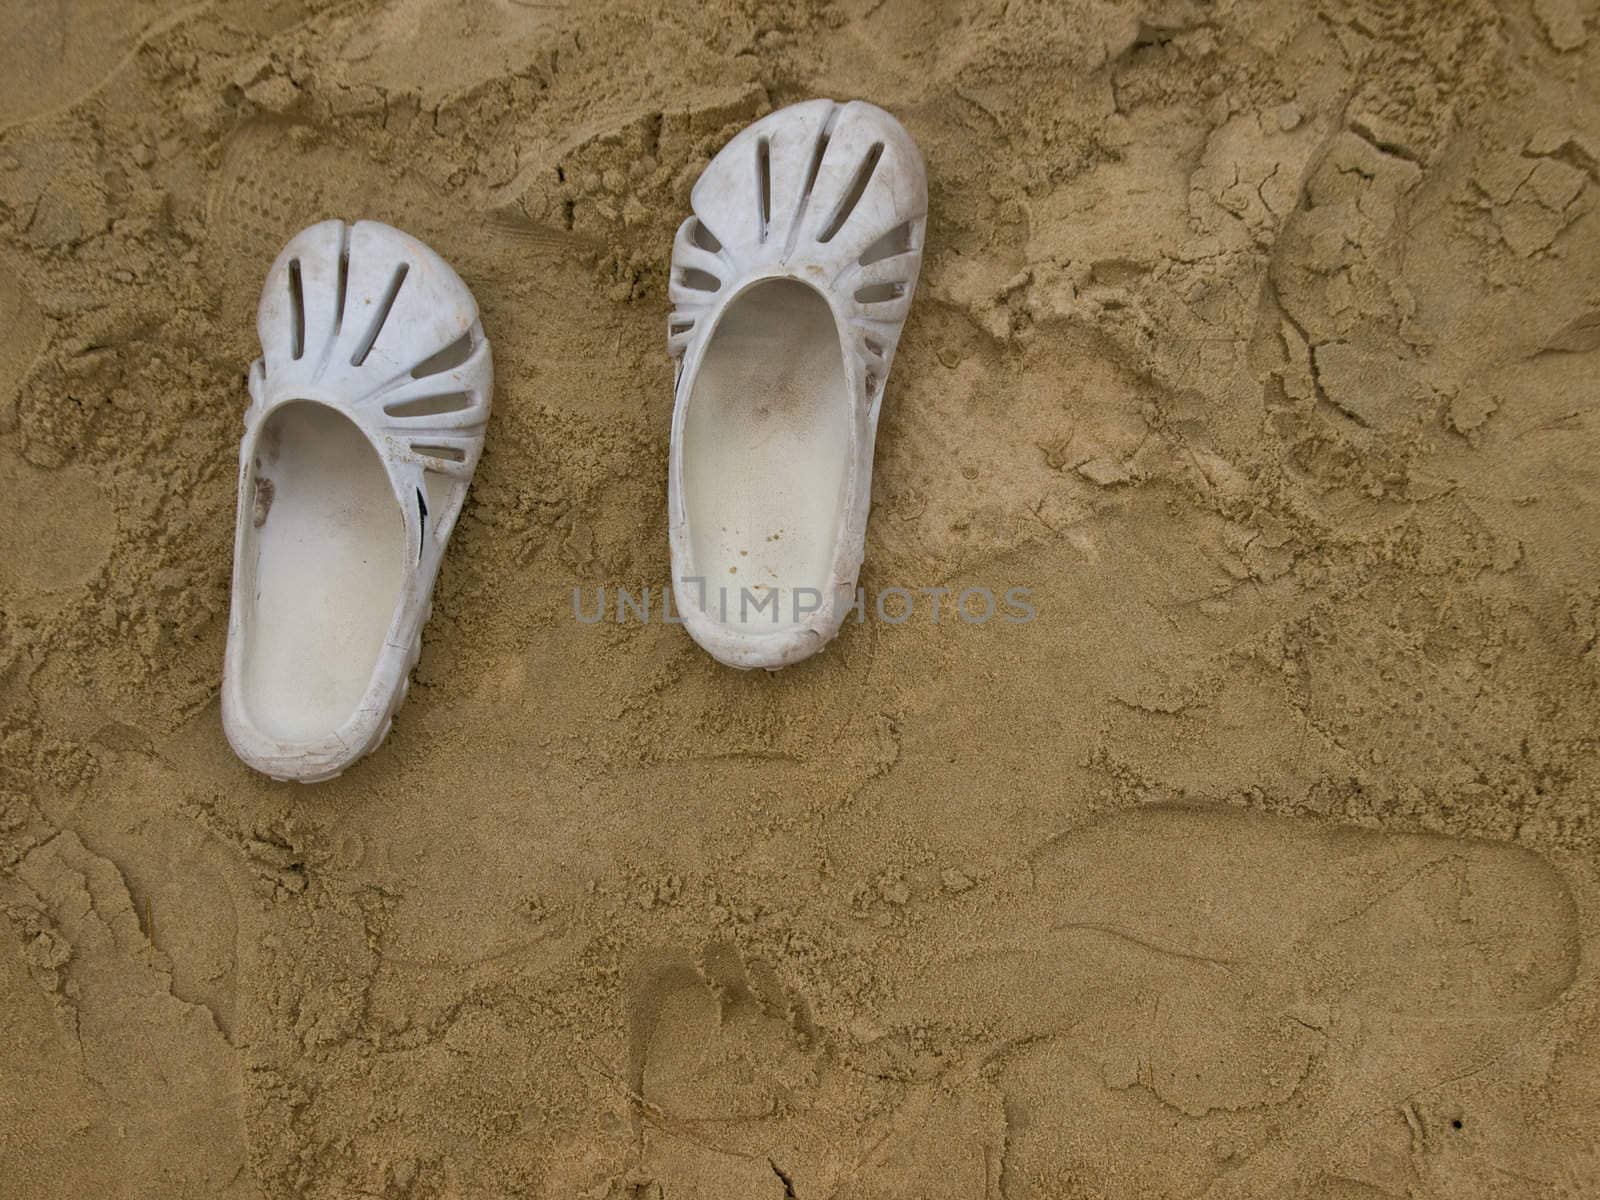 sand shoes by dyvan